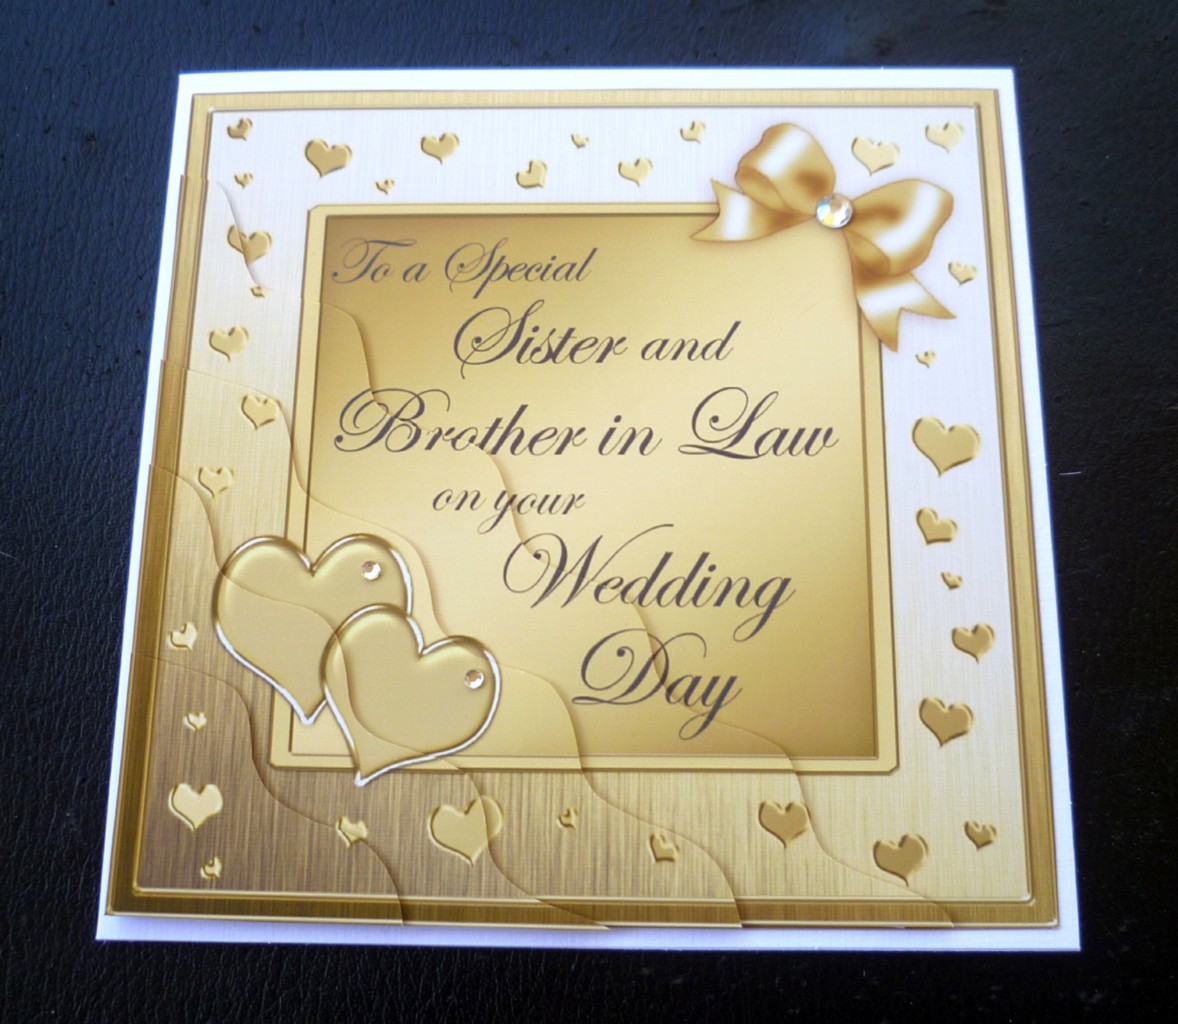 Special Sister & Brother In Law Wedding Day Card 4